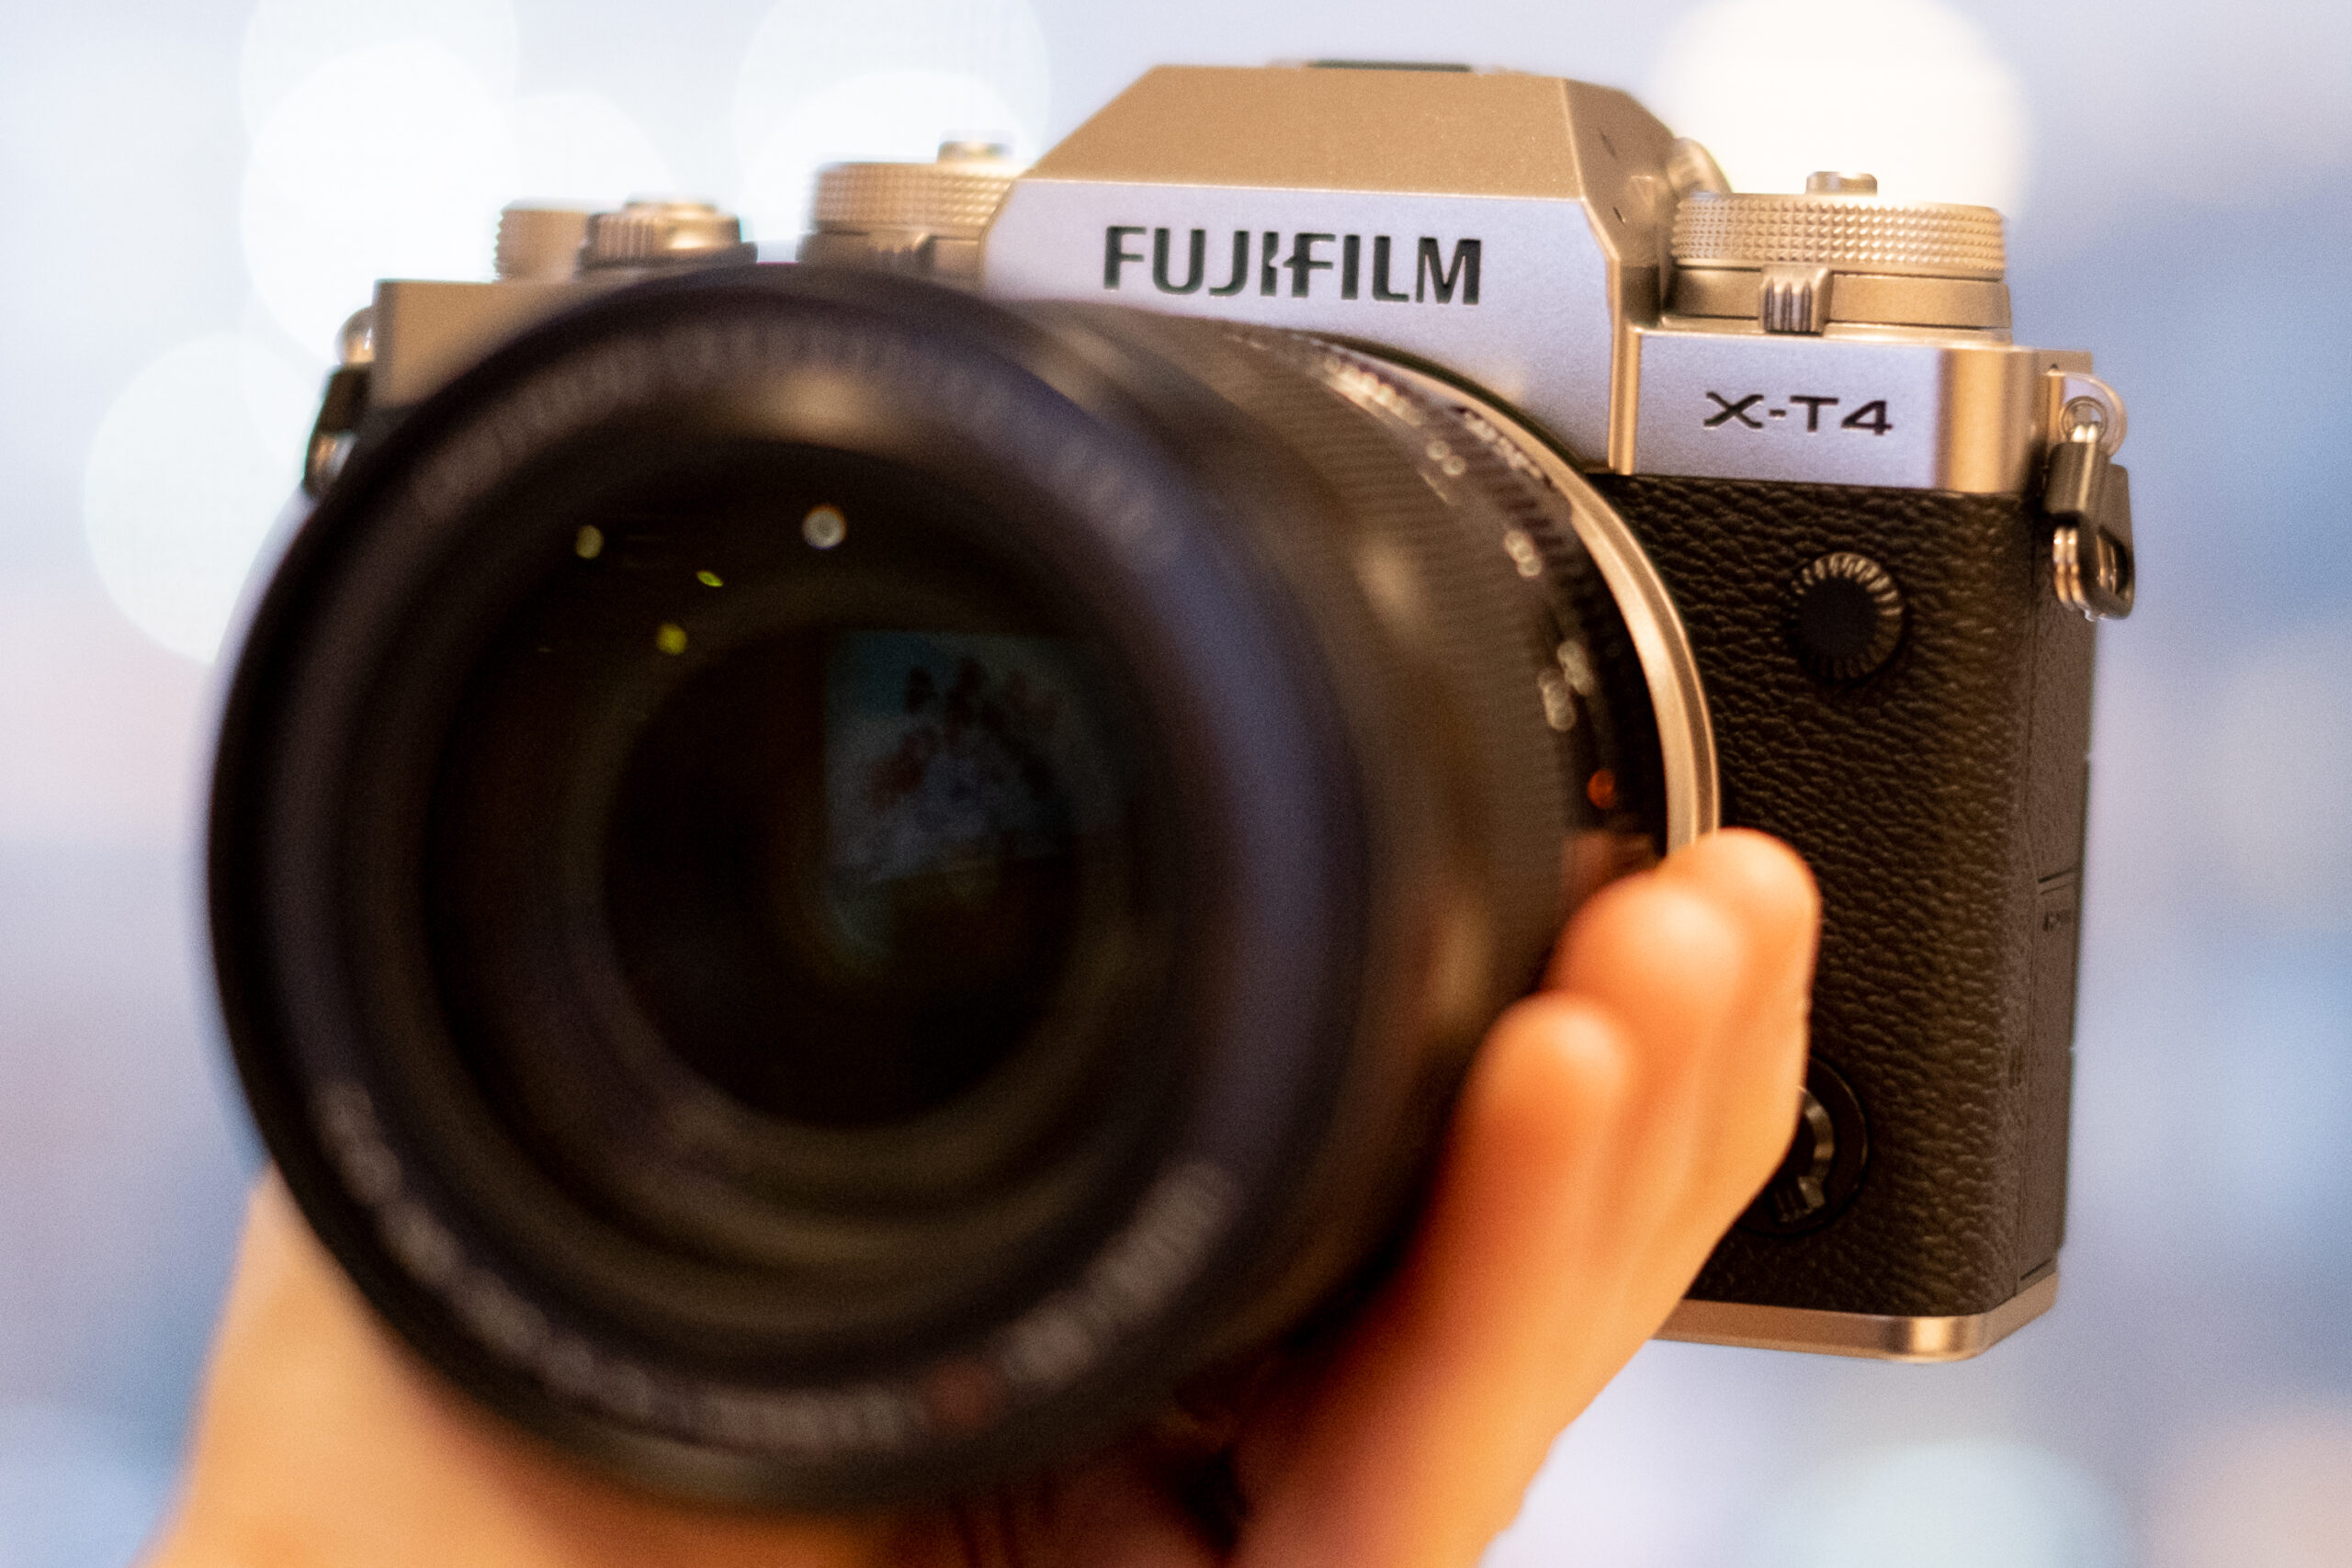 The sad history of digital cameras trying to imitate film